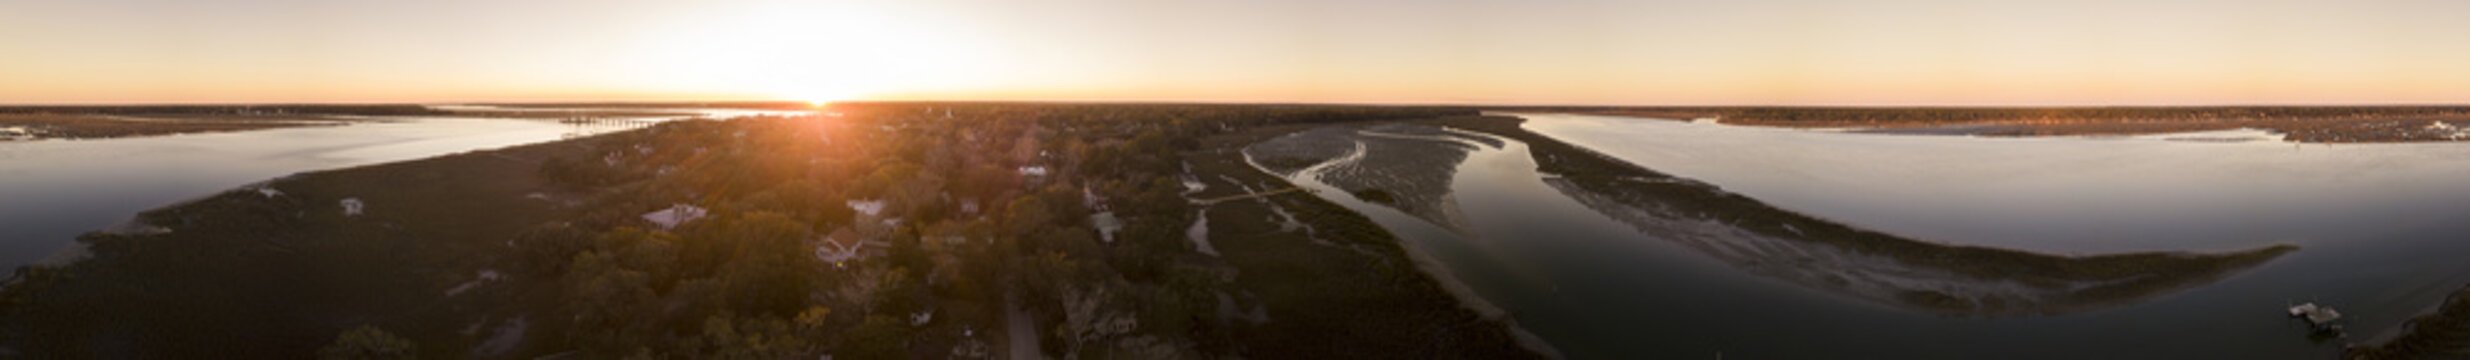 Seamless 360 degree panorama of town and river at sunset, Beaufort, South Carolina.